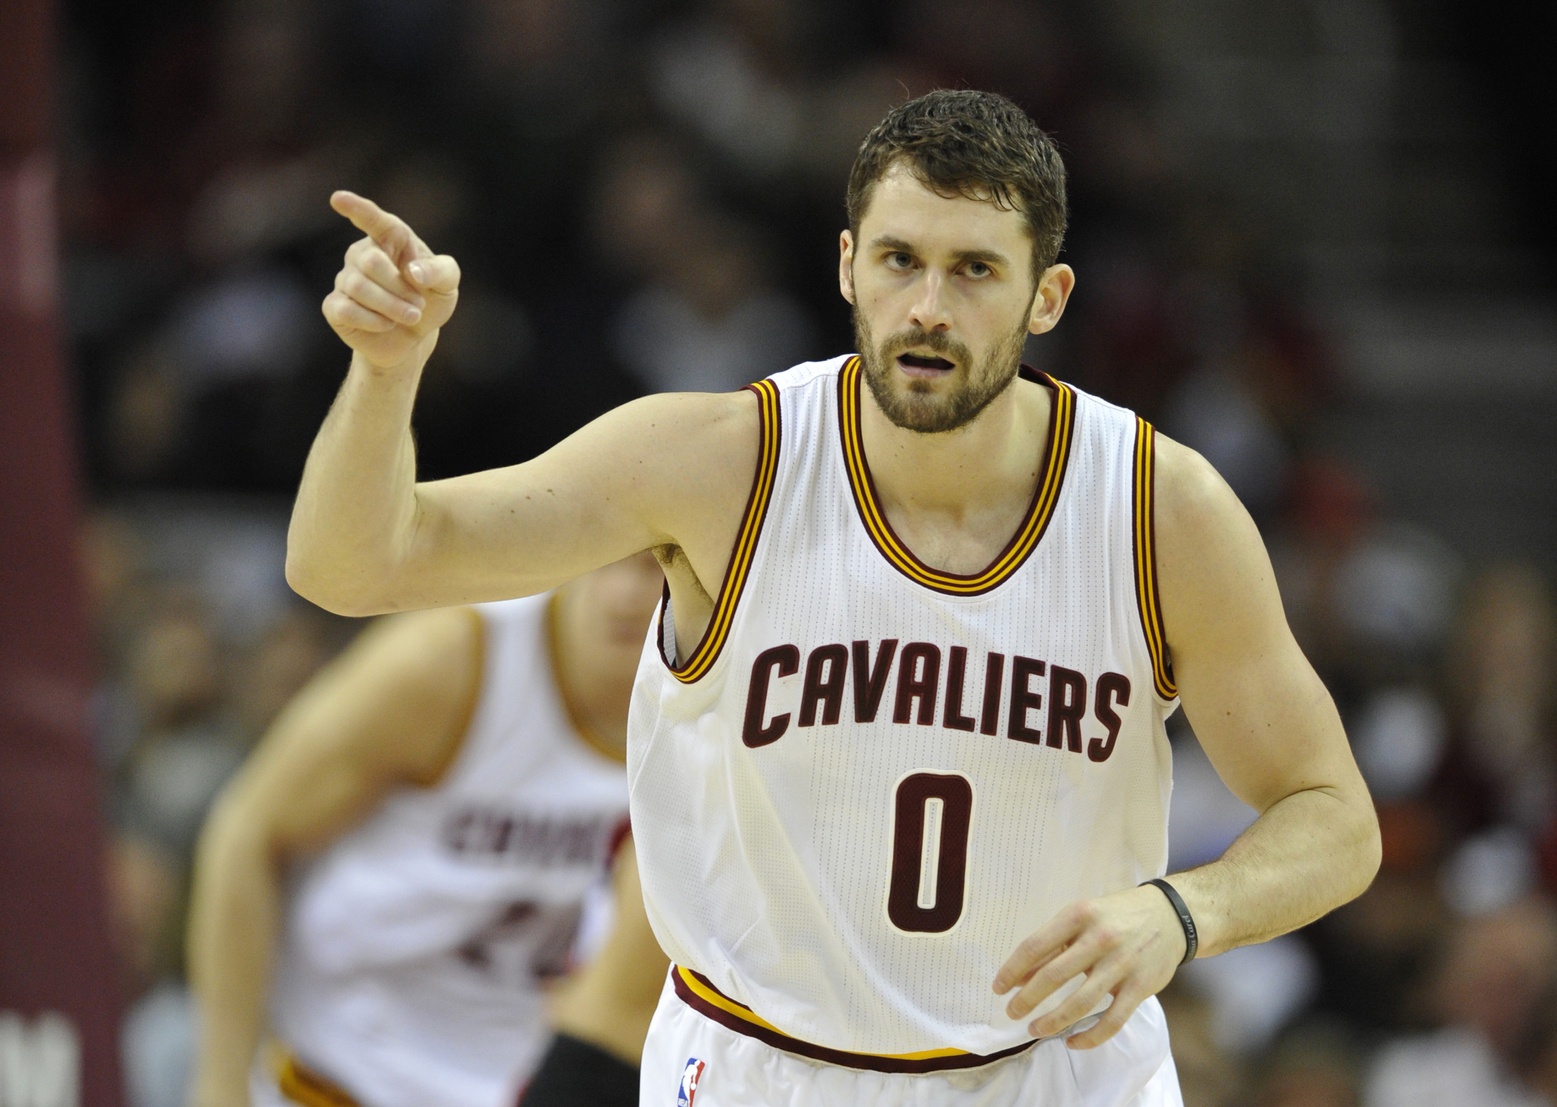 Kevin Love should be ready to help the Cavaliers in their third consecutive NBA Finals matchup against the Warriors.